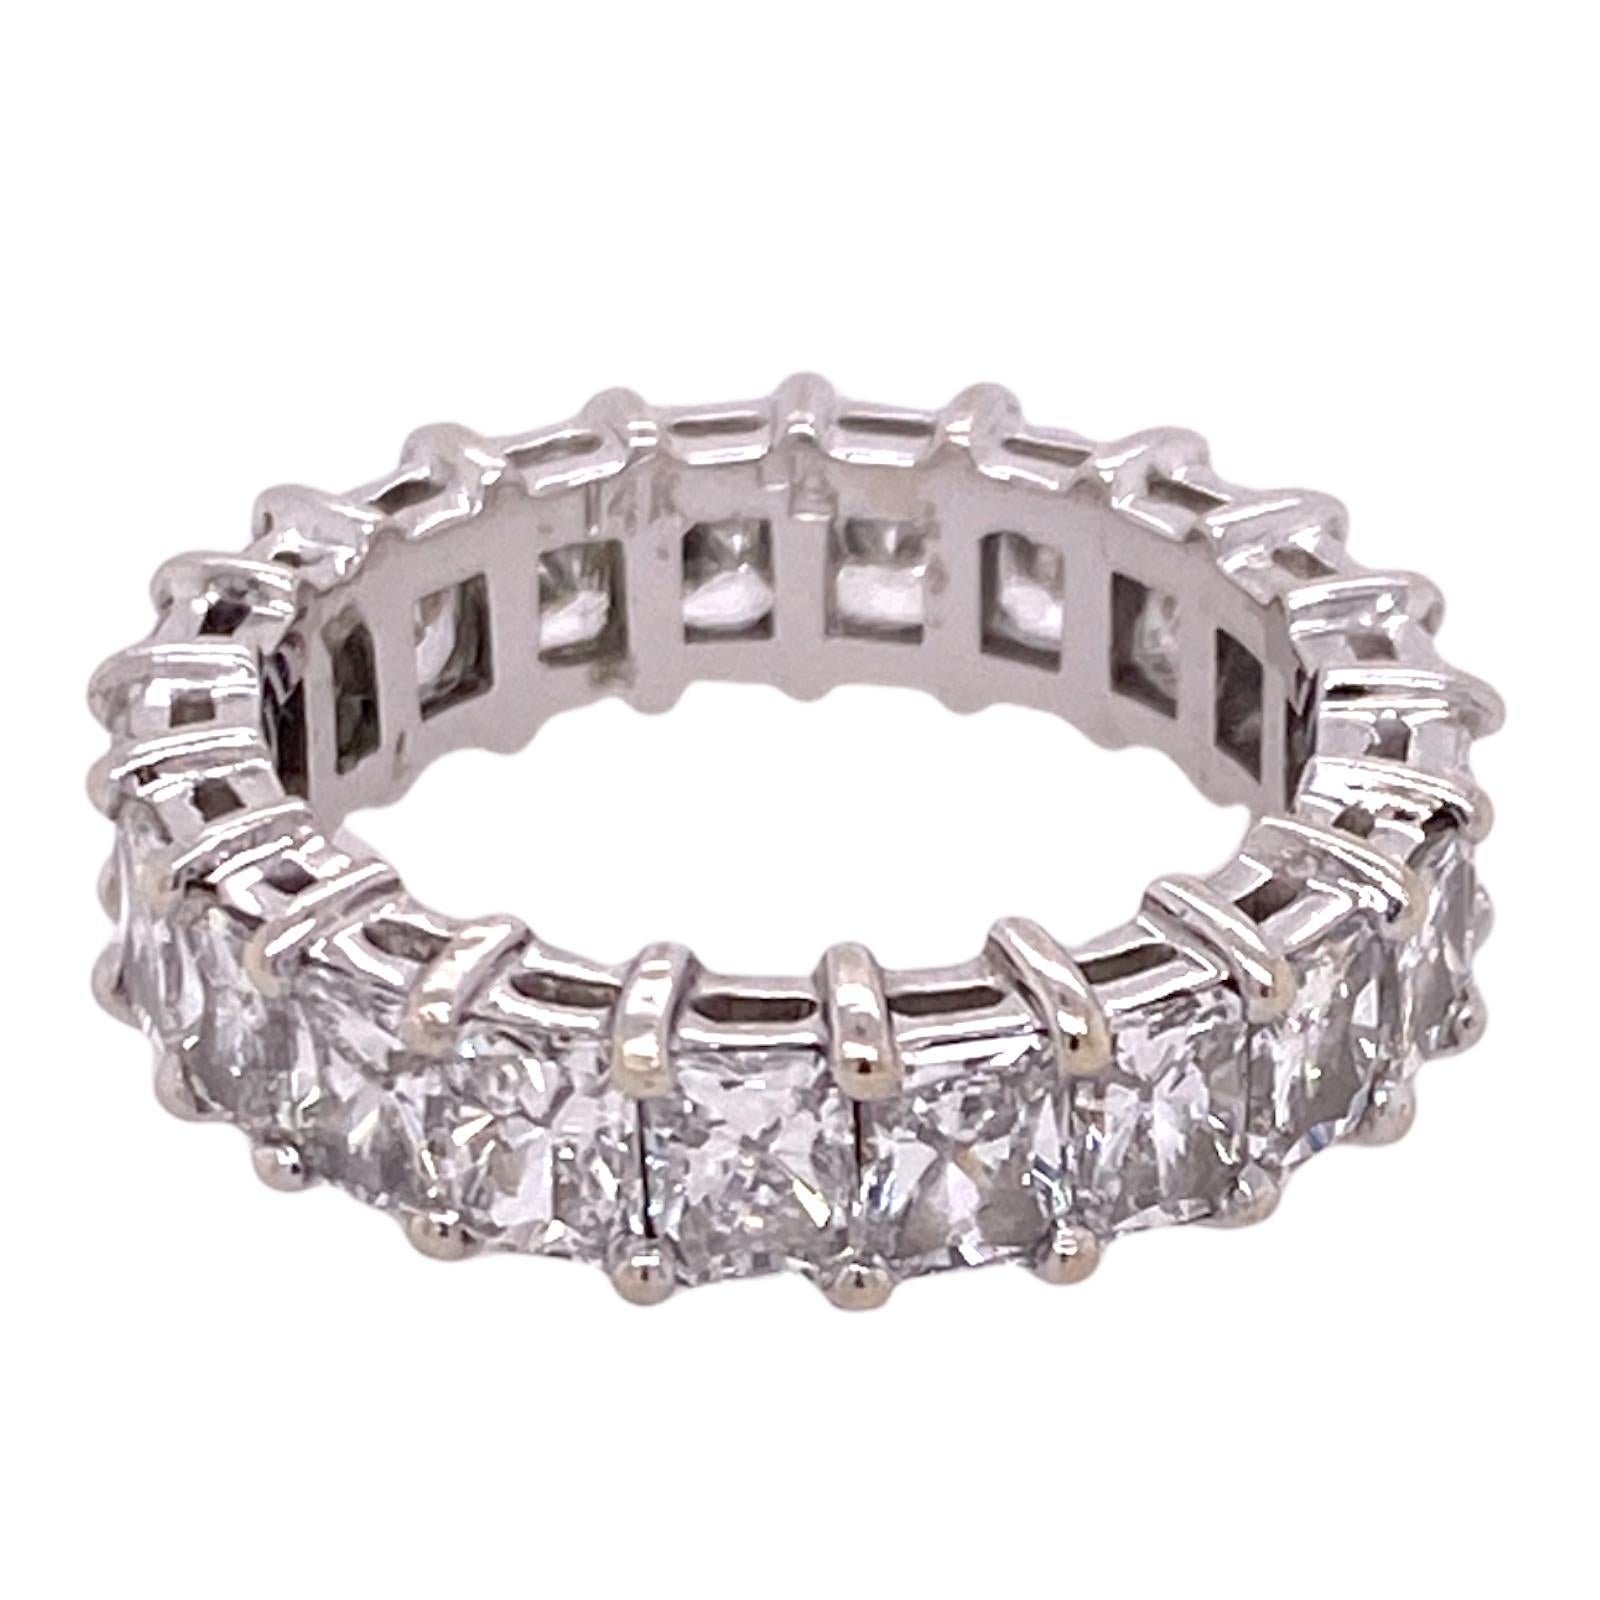 Gorgeous emerald cut diamond eternity band hand crafted in 14 karat white gold. The band features 21 perfectly matched emerald cut diamonds weighing 3.75 carat total weight. The diamonds are graded G-I color and VS2-SI1 clarity. The band measures